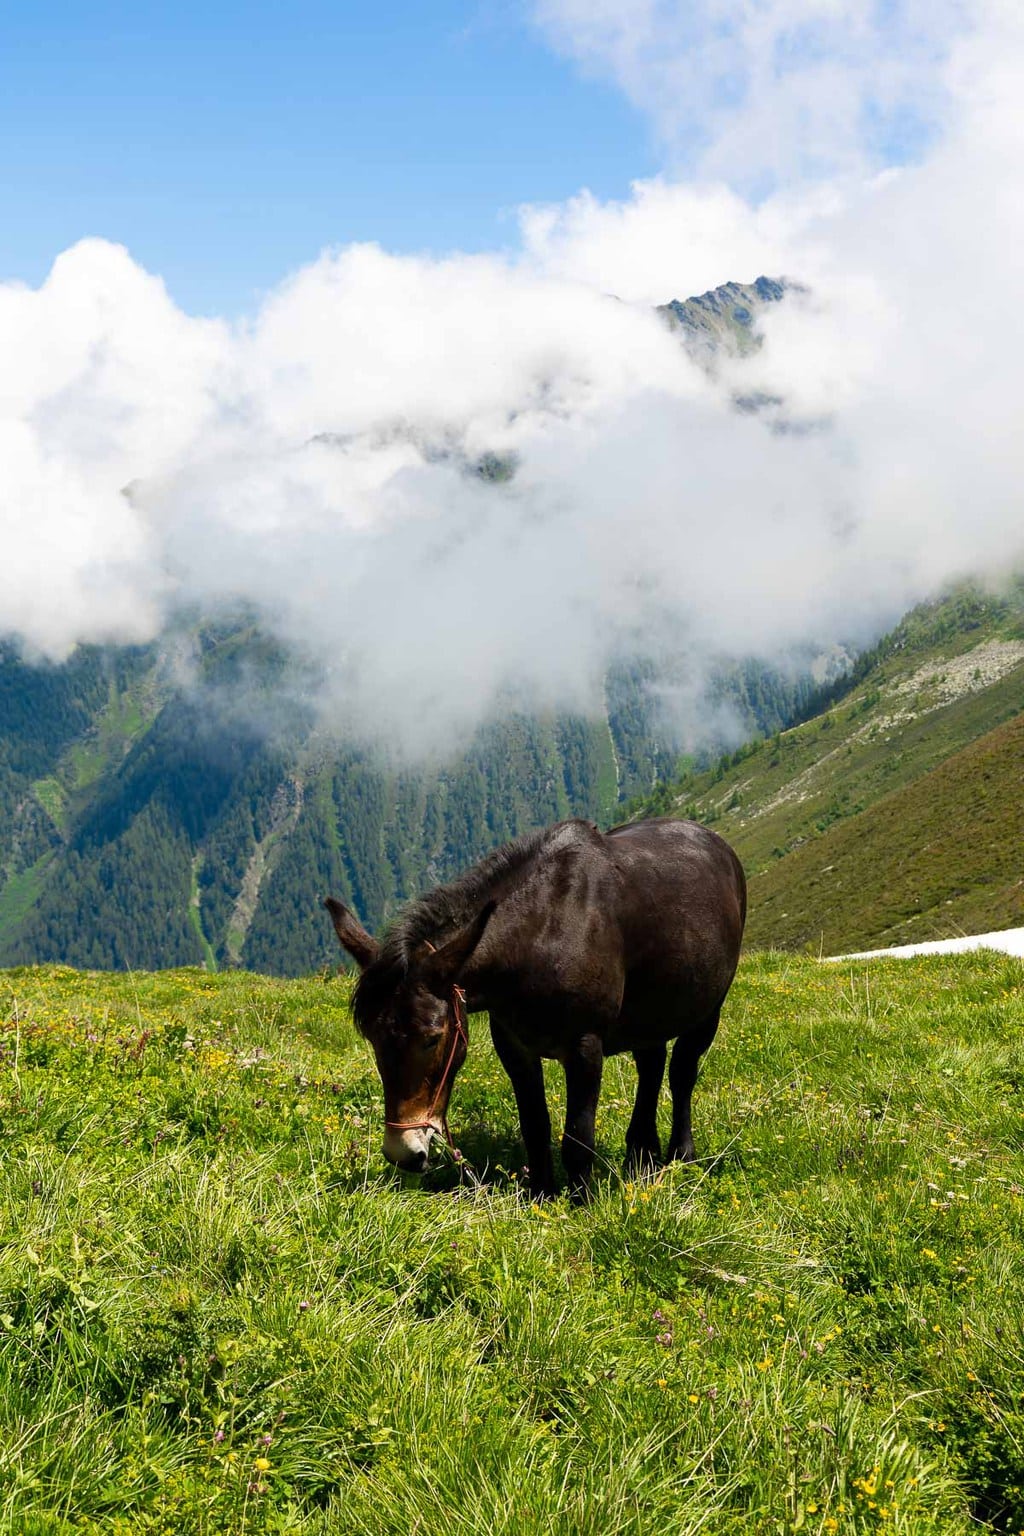 A horse grazing in the Alpine meadows near Le Tour, France looking out towards Switzerland.